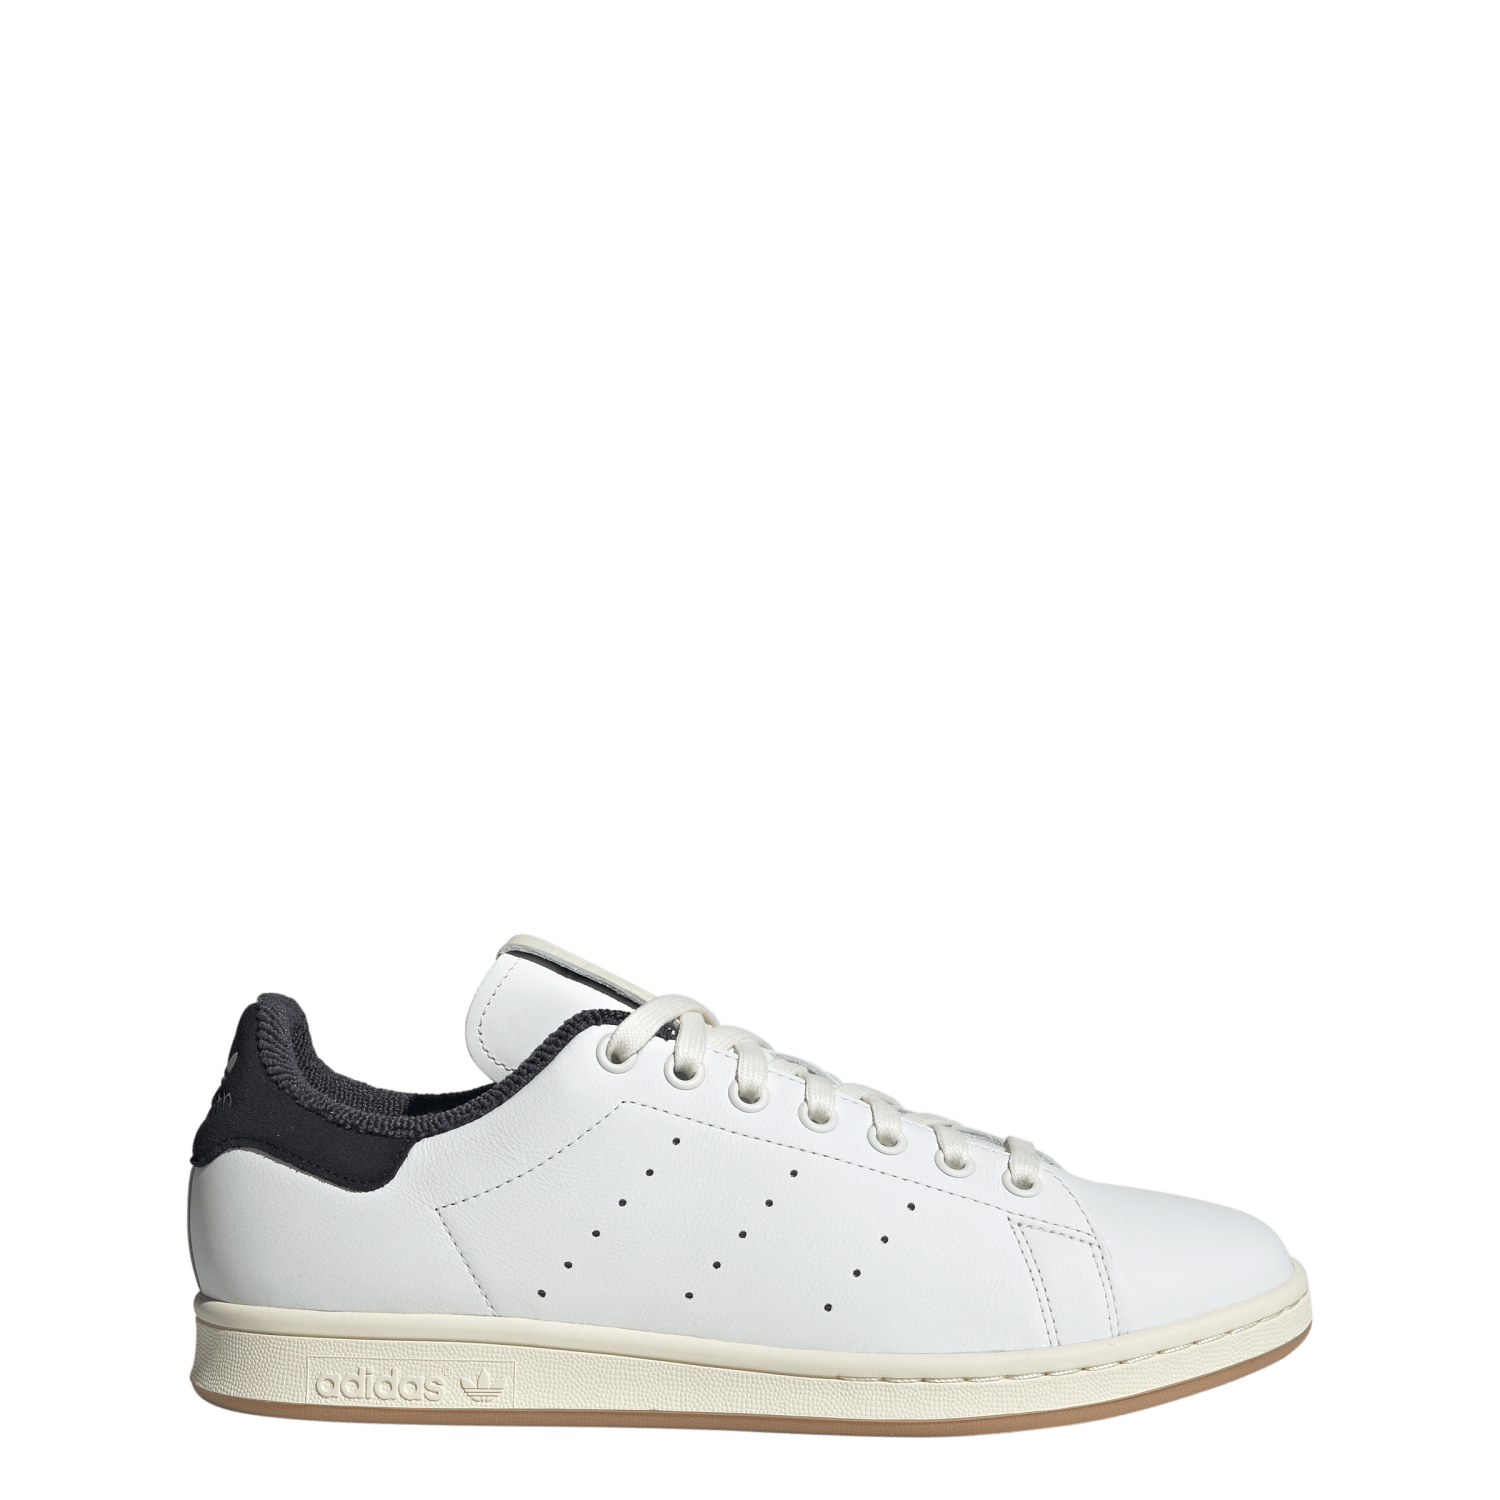 Adidas Stan Smith winter pack